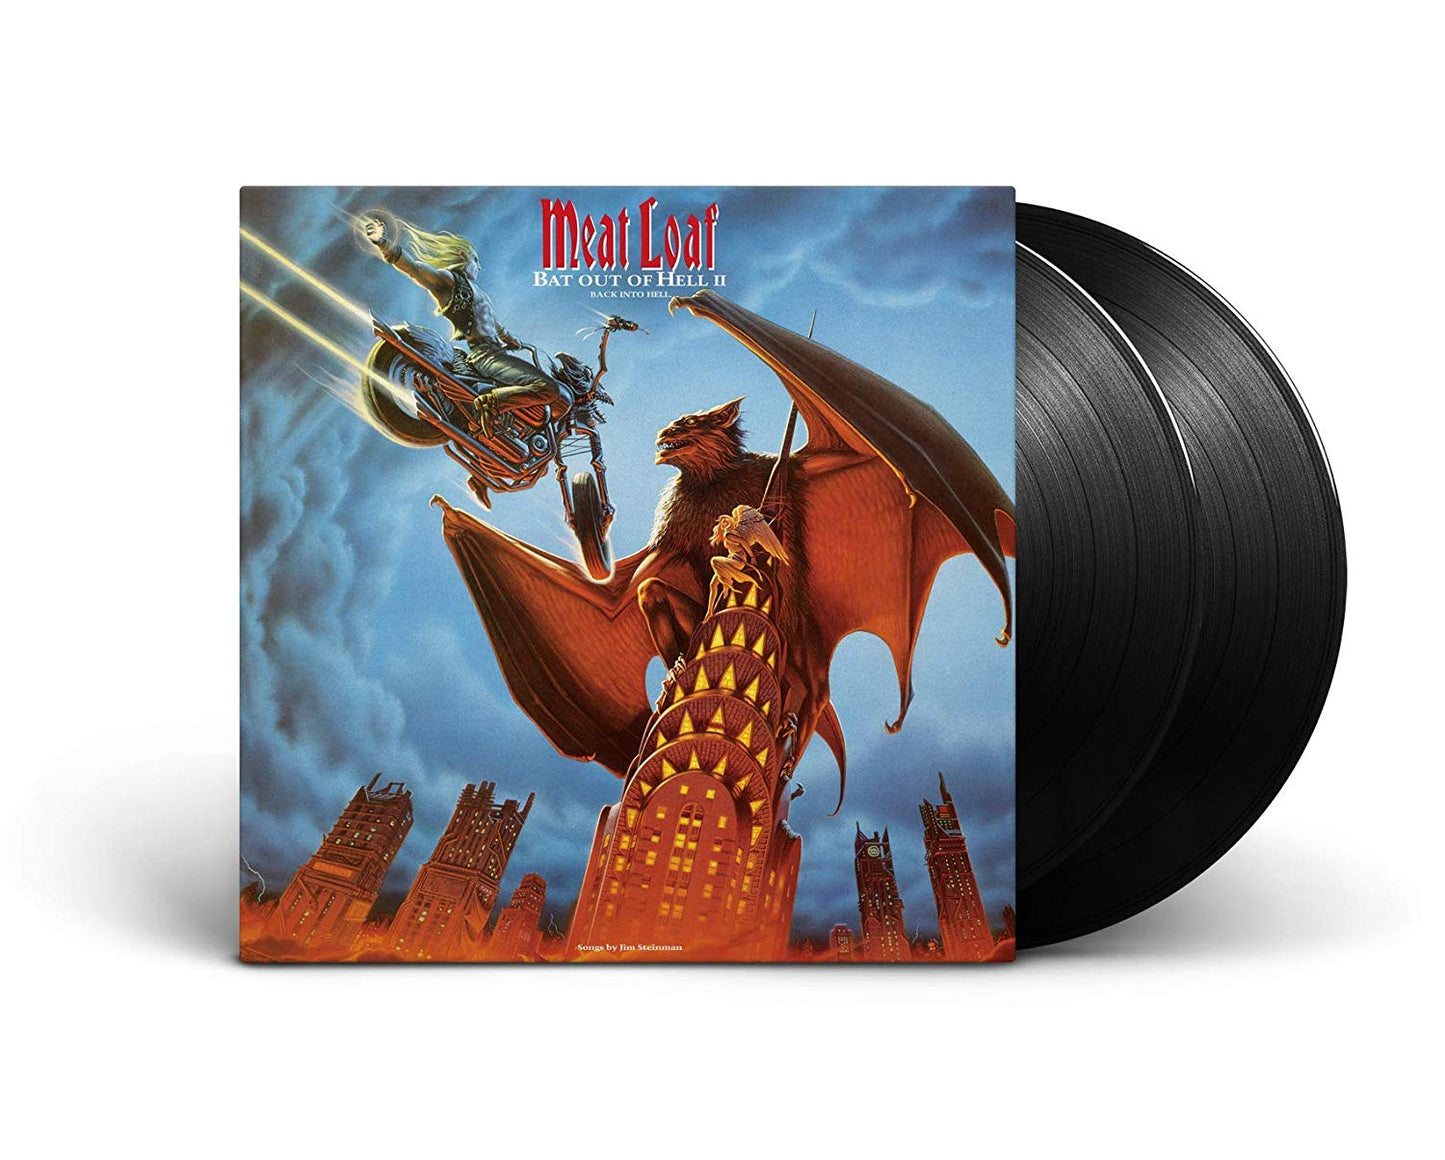 Meat Loaf - Bat Out of Hell II - LP